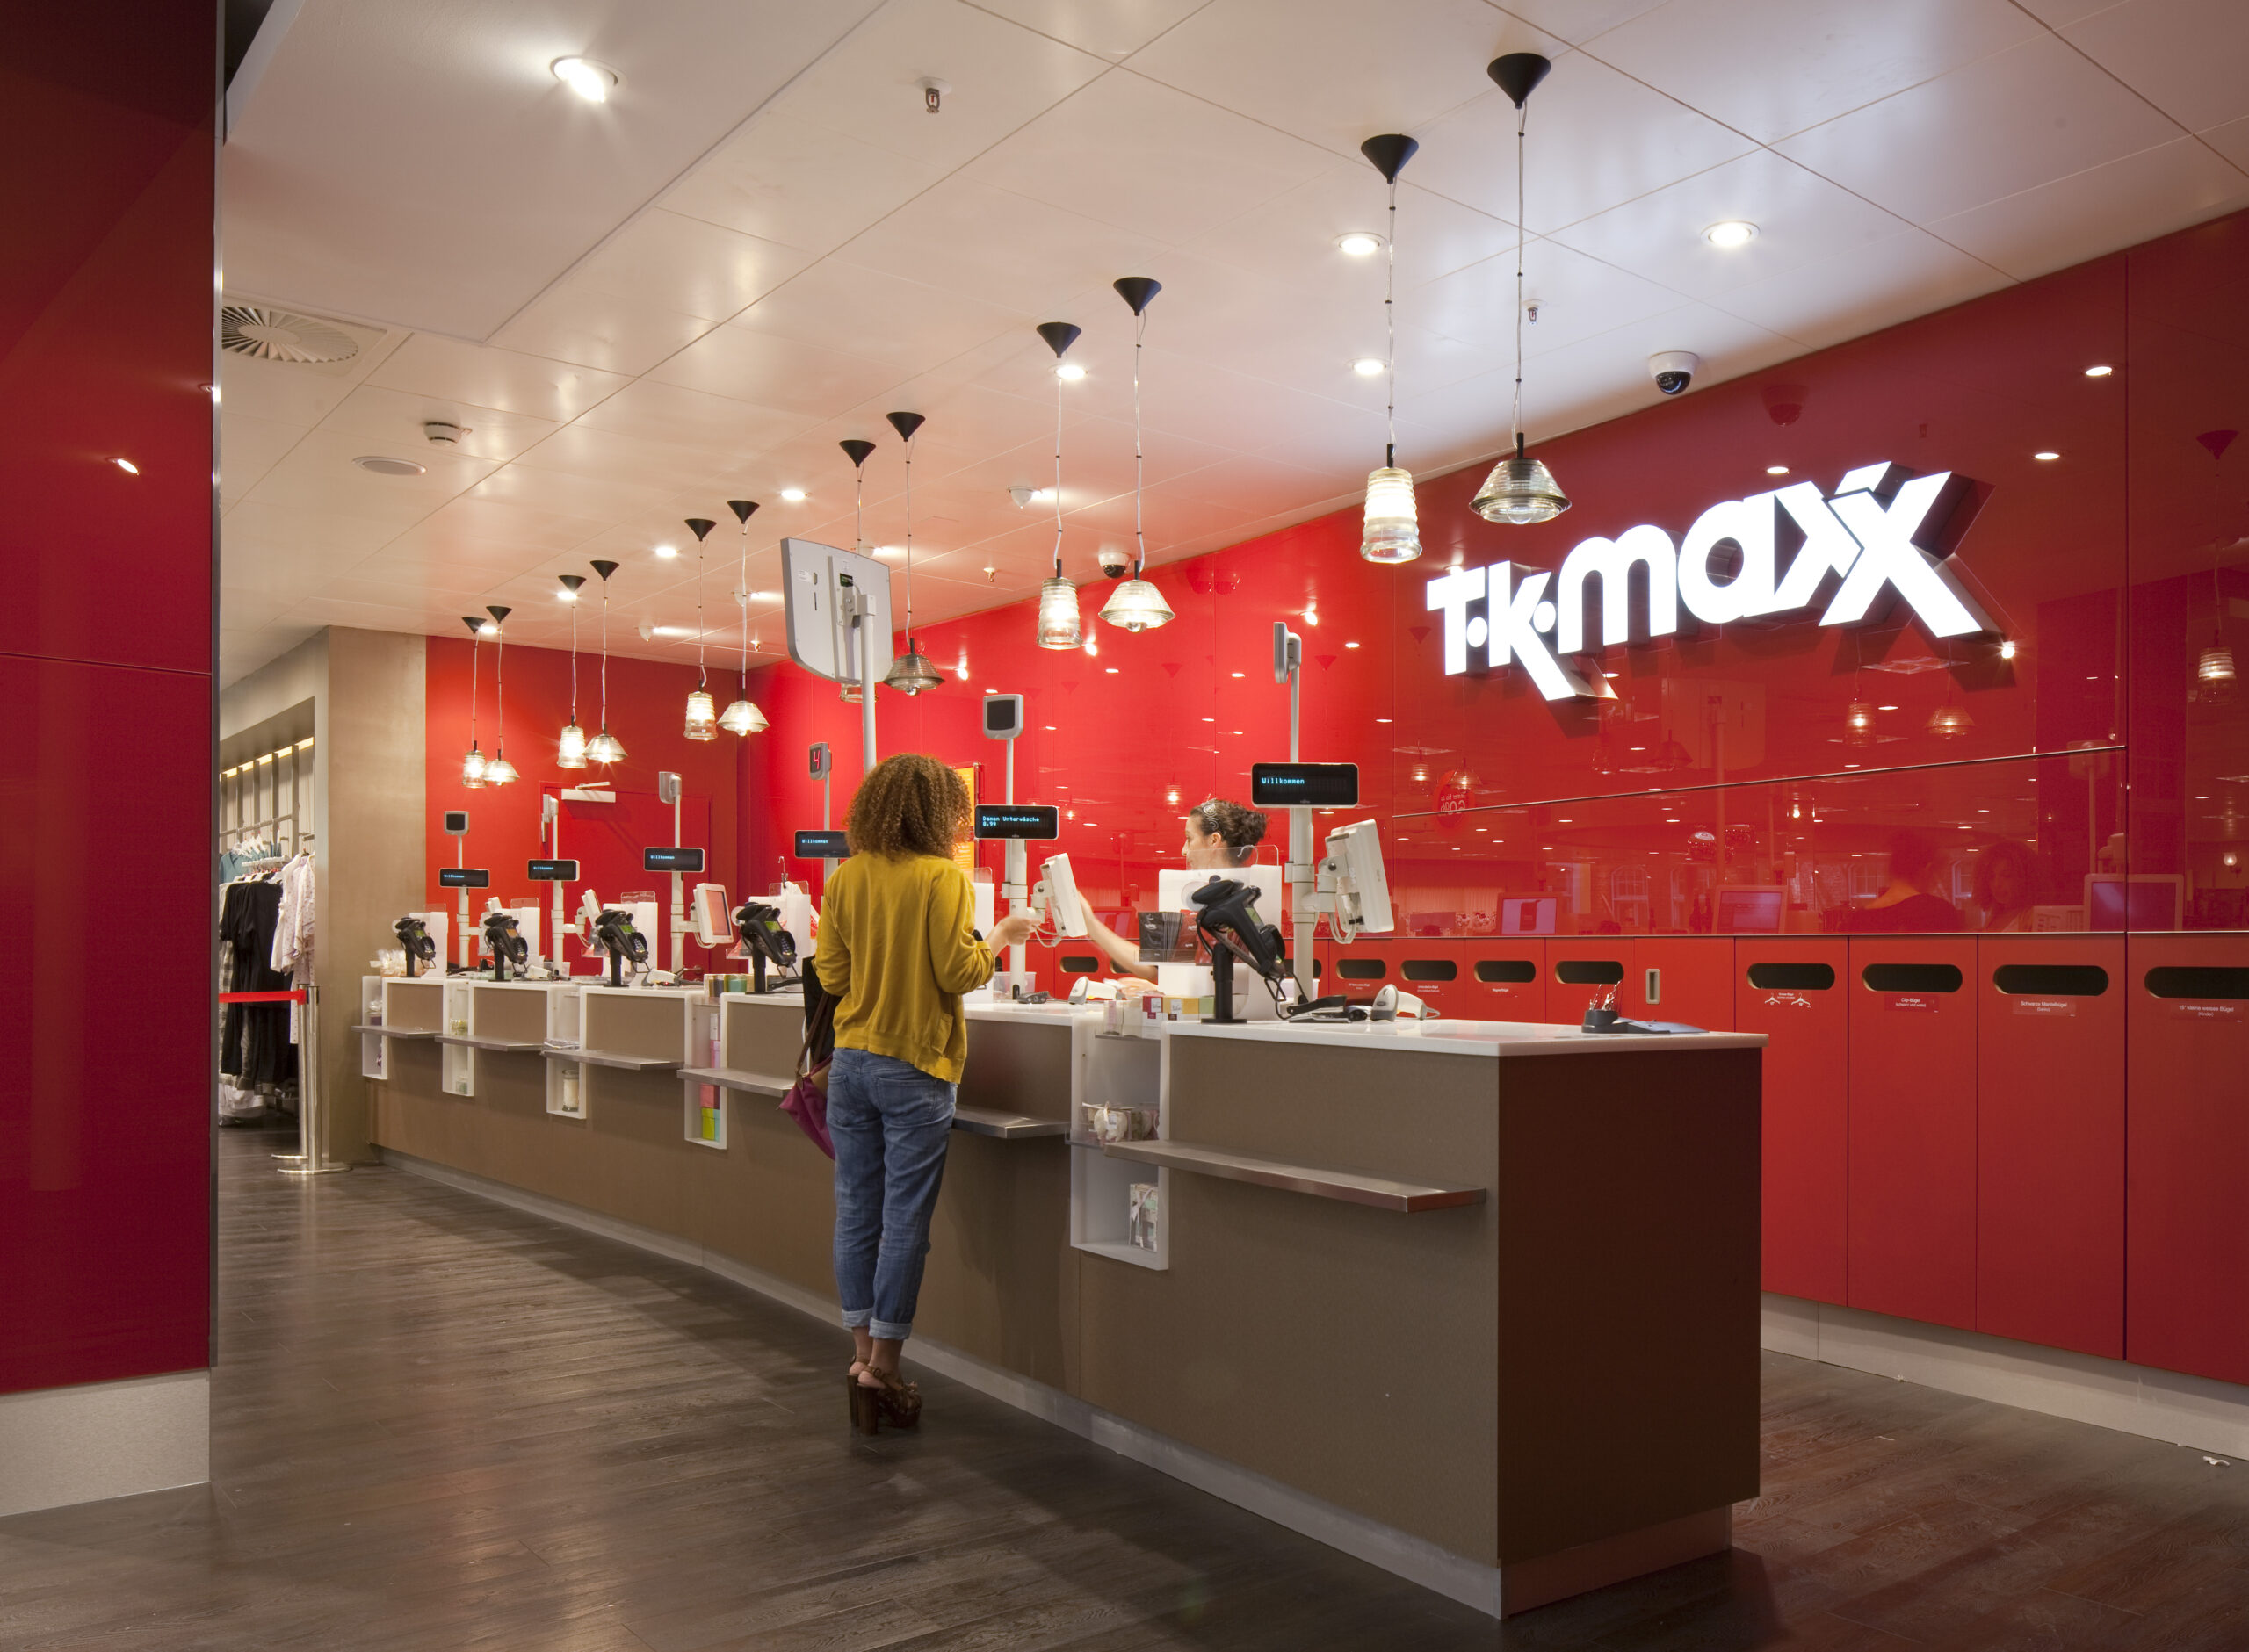 TK Maxx: Creating a space for exploration and immersion of products